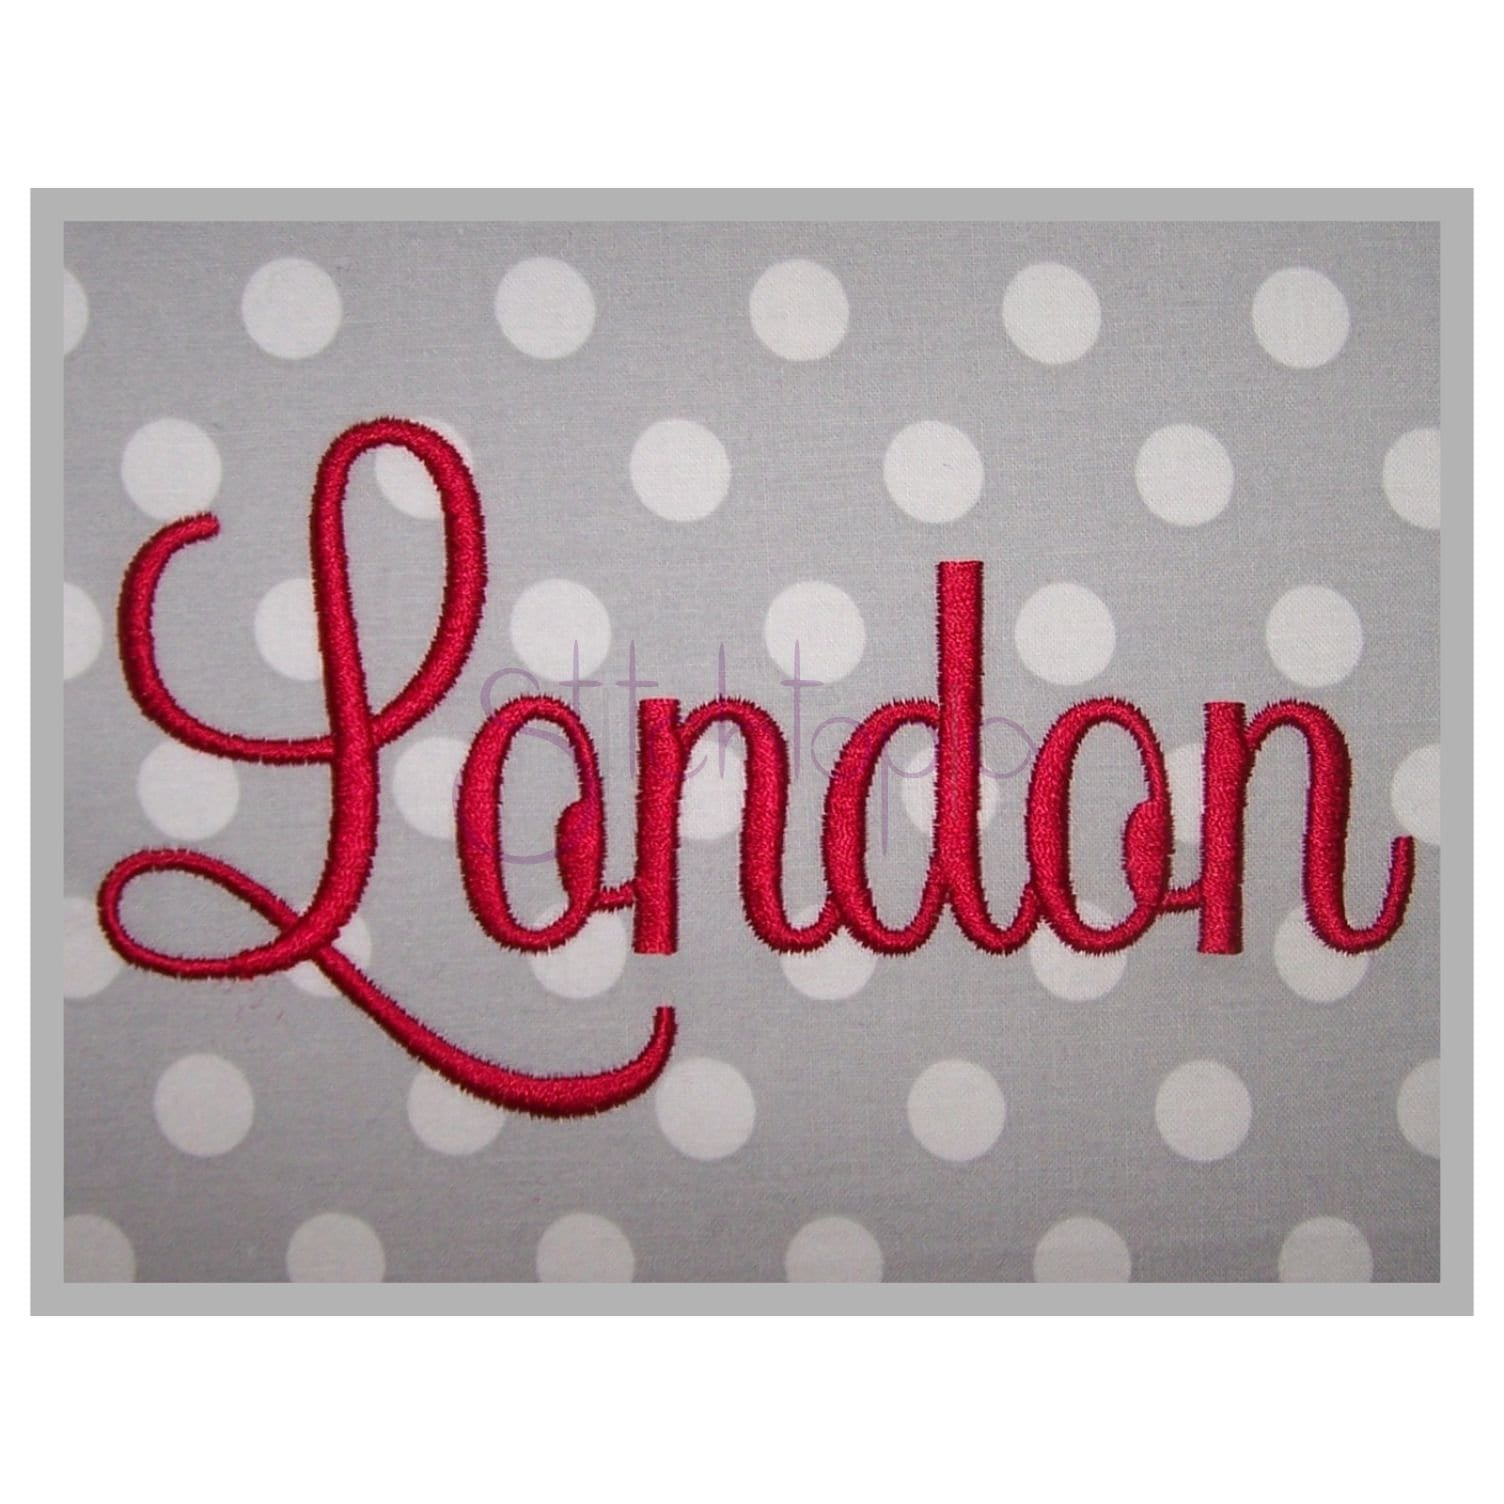 London Embroidery Font 1 1 1.5 2 - Etsy